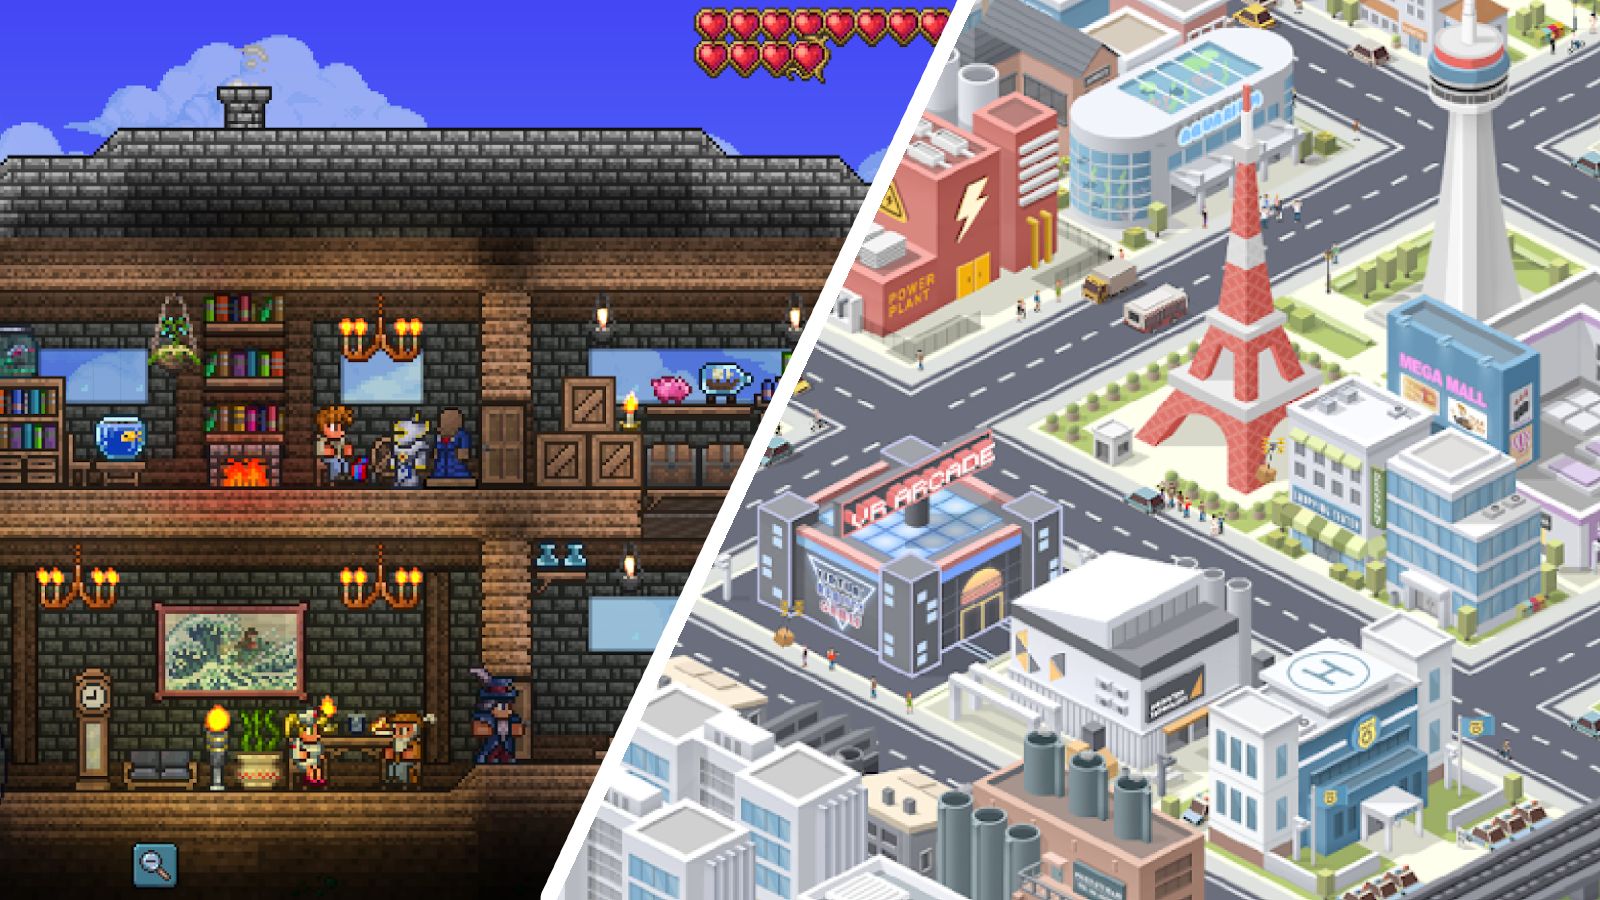 Screenshots of Terraria and Pocket City in a collage